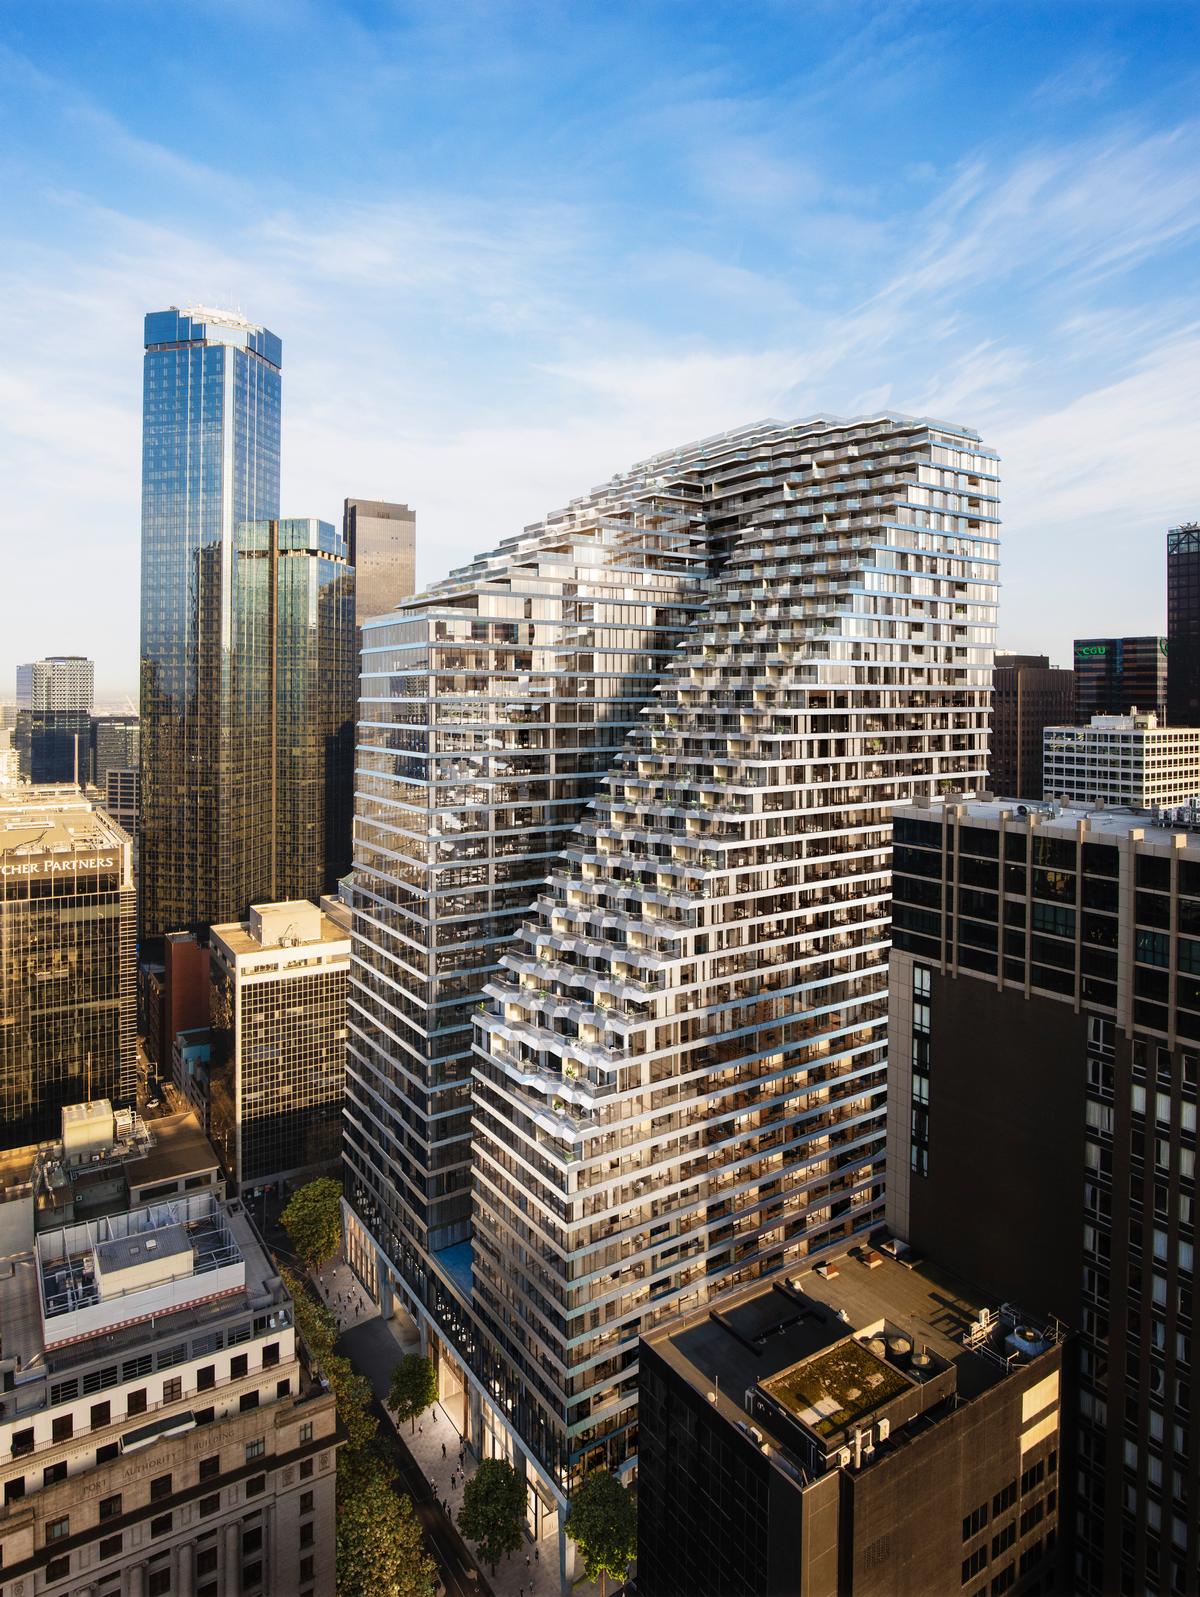 The mixed-use Collins Arch building has been designed by SHoP Architects and Woods Bagot / Marriott International 